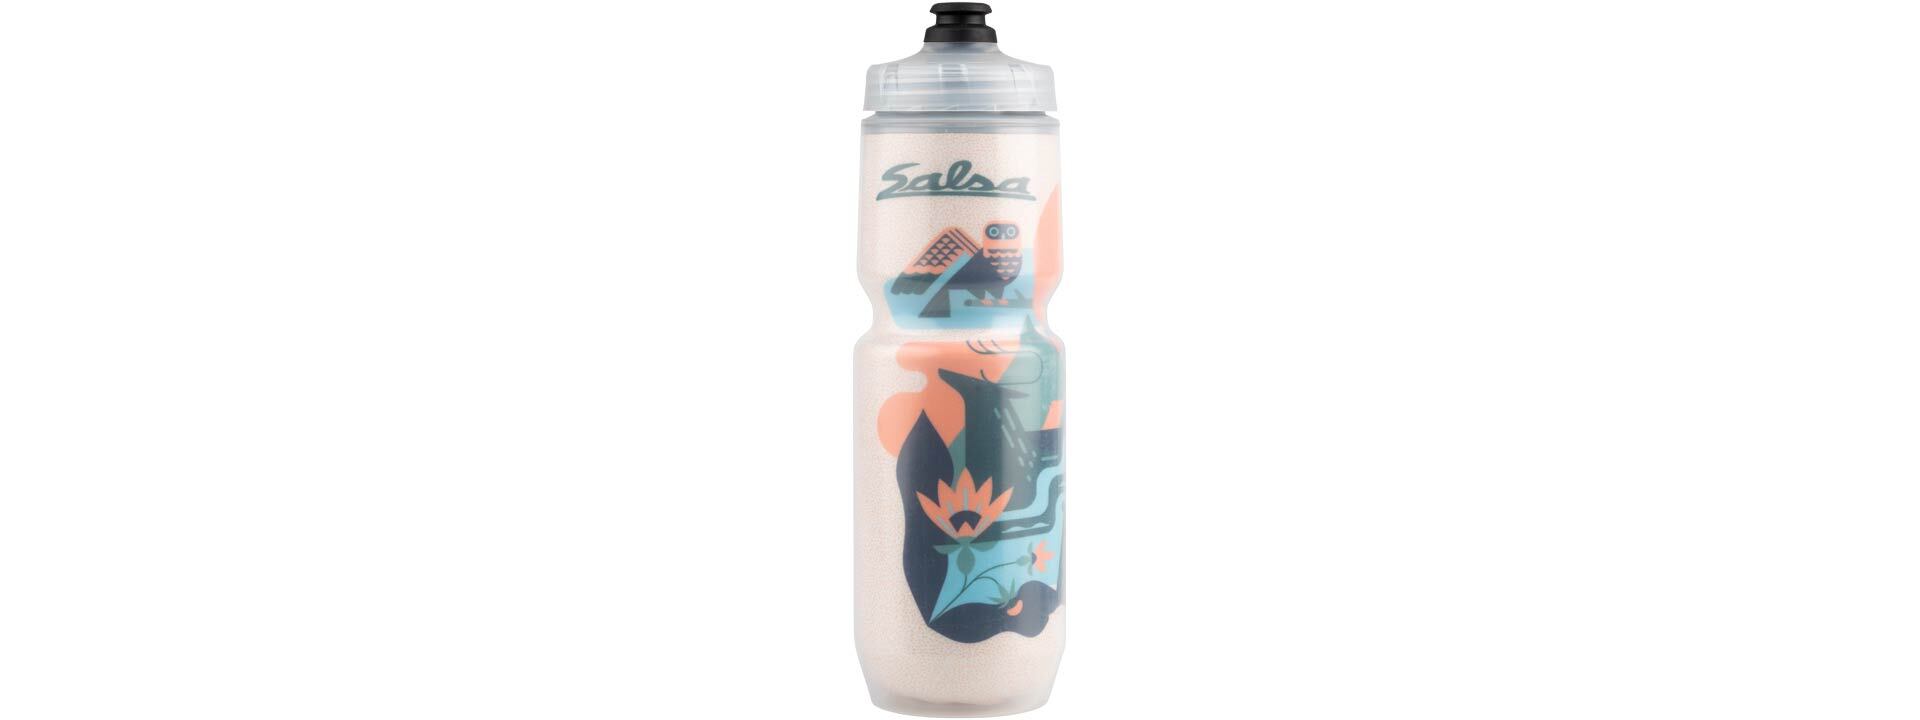 https://www.salsacycles.com/assets/salsa-meander-purist-insulated-water-bottle-WB2913-1920x720.jpg